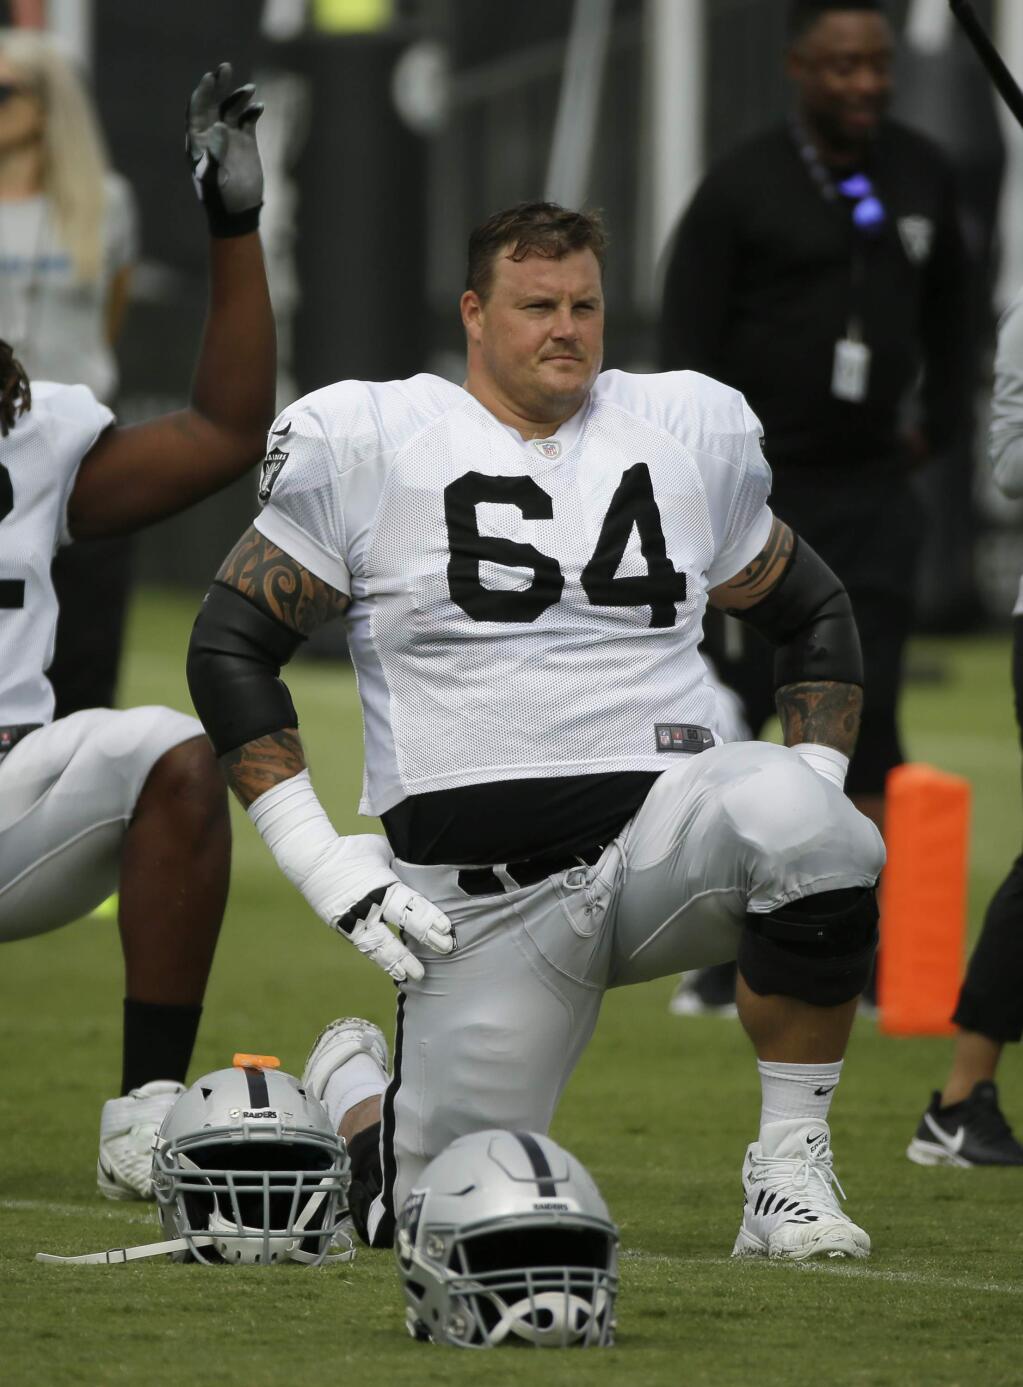 FILE - In this July 29, 2019, file photo, Oakland Raiders center Richie Incognito (64) stretches during NFL football training camp in Napa, Calif. The Oakland Raiders and their big personalities like Antonio Brown and Richie Incognito are ready to be stars on HBO's 'Hard Knocks.' (AP Photo/Eric Risberg, File)